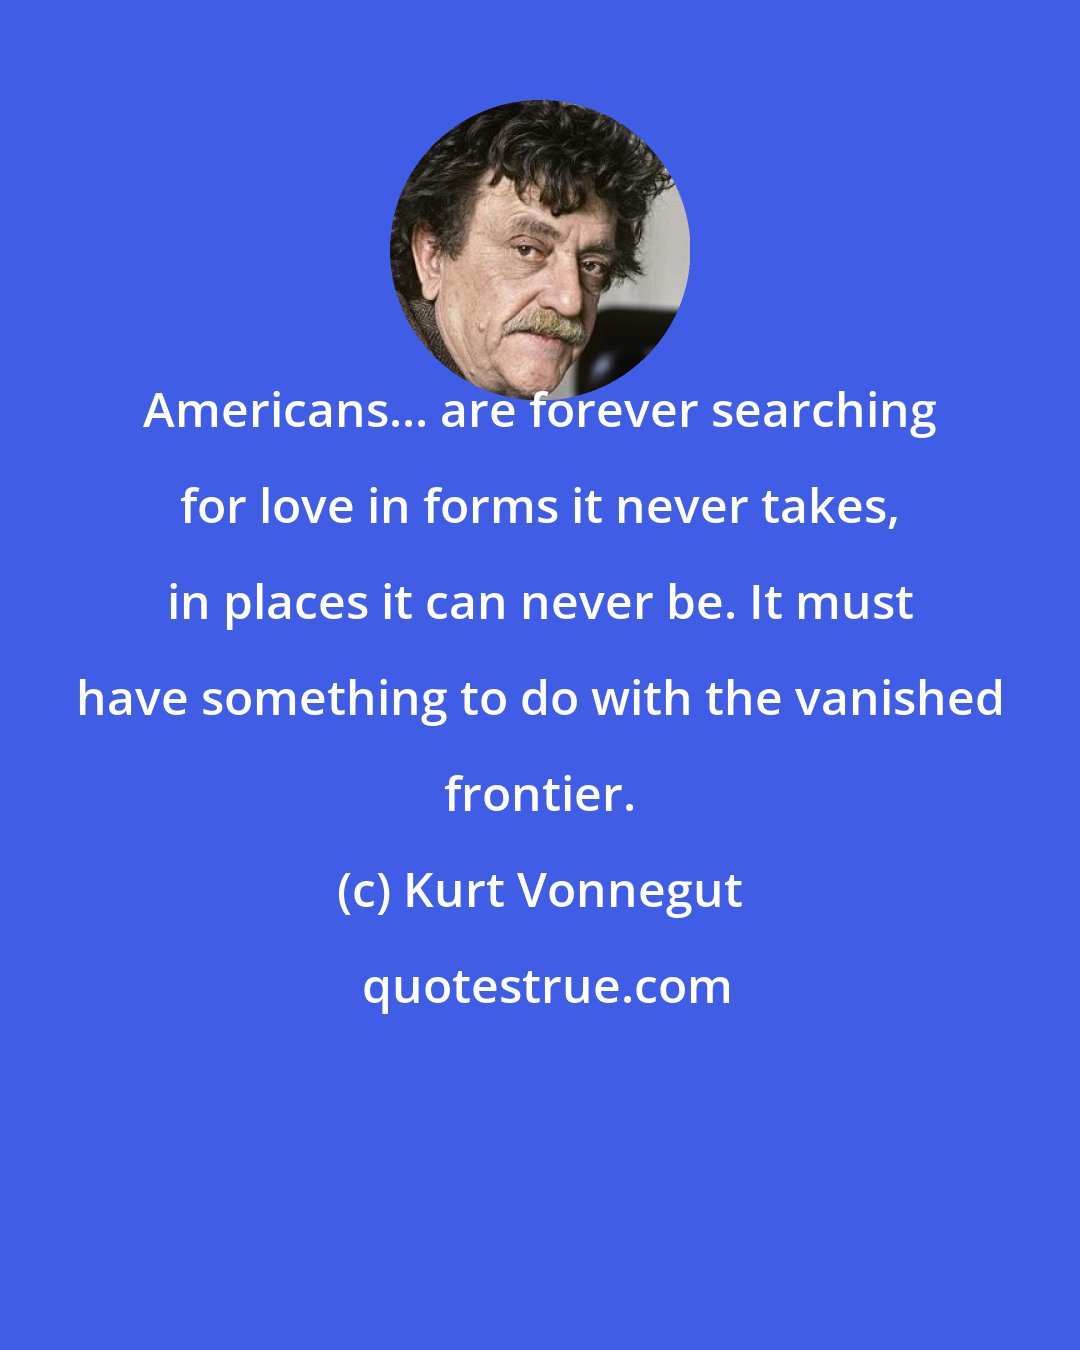 Kurt Vonnegut: Americans... are forever searching for love in forms it never takes, in places it can never be. It must have something to do with the vanished frontier.